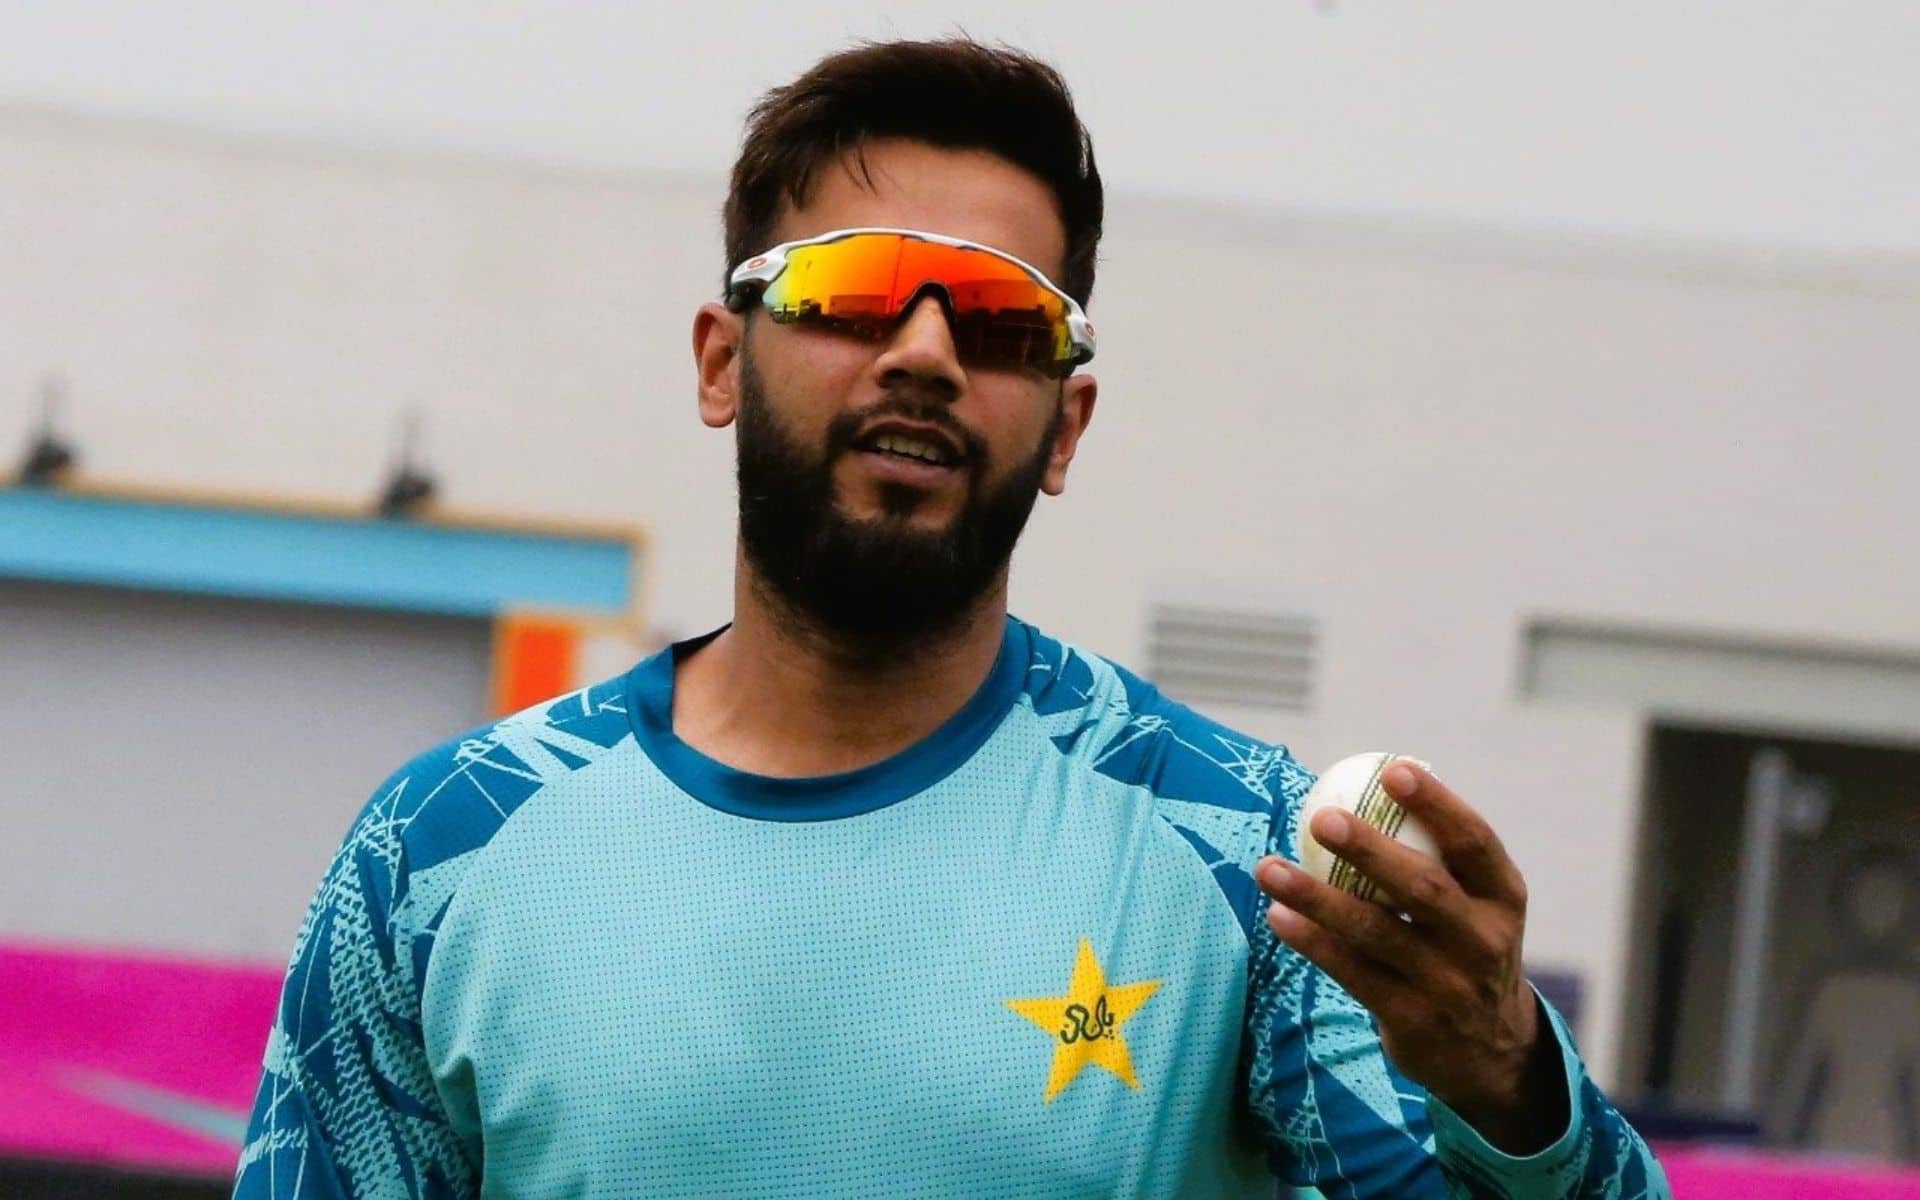 Pakistan Suffer 'HUGE' Injury Blow; Star Player Ruled Out Of T20 WC Clash Vs USA